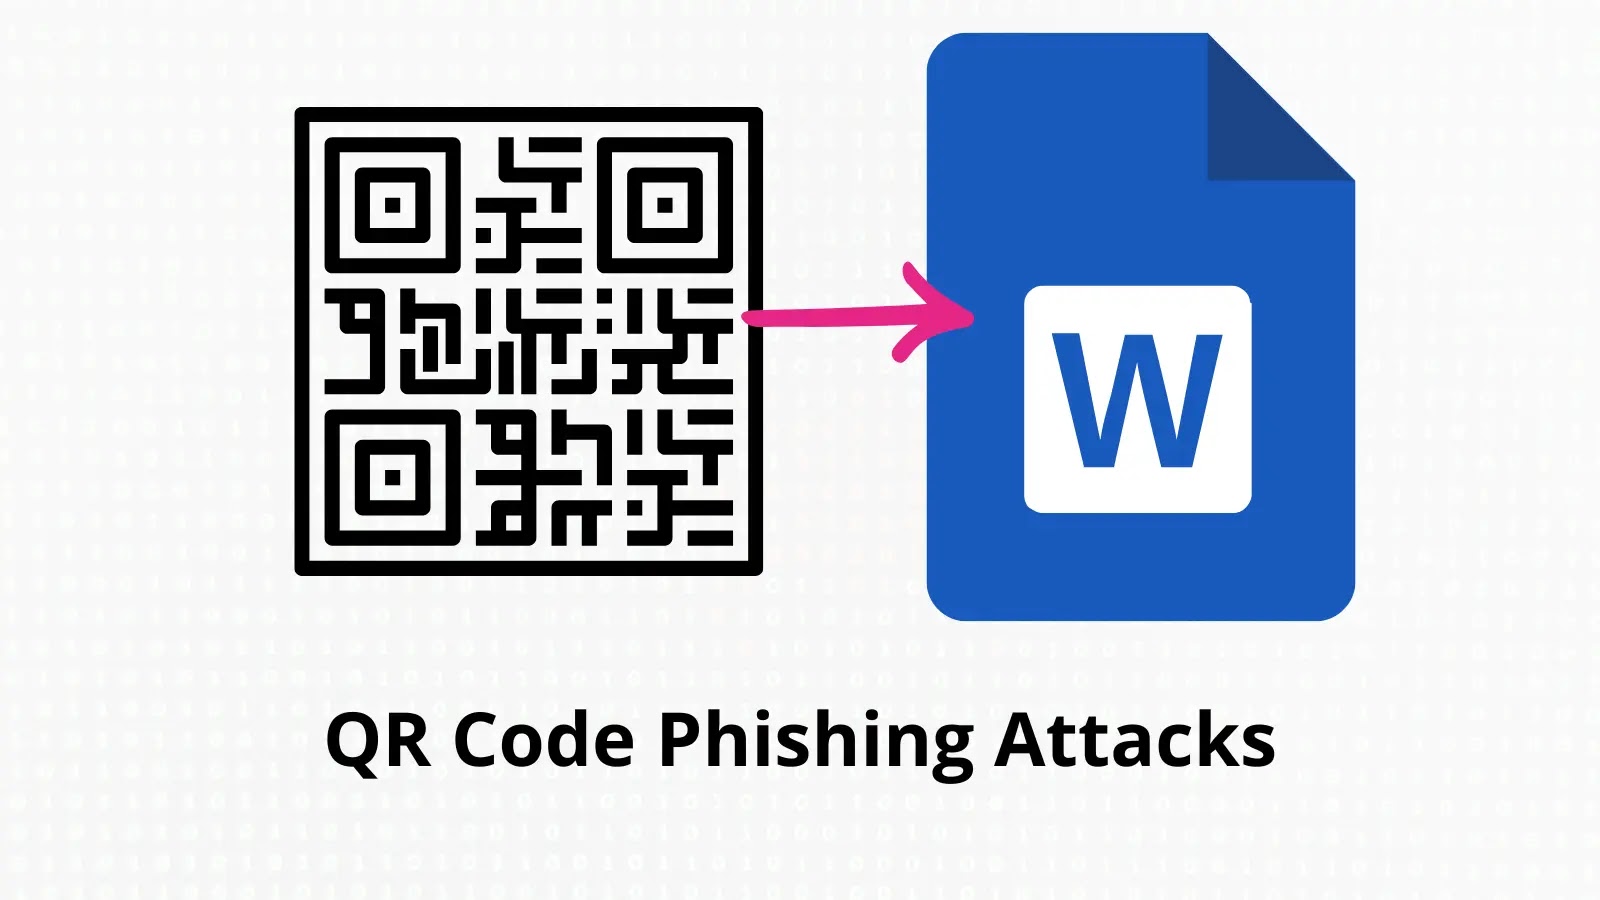 Hackers Using Weaponized Word Documents In QR Code Phishing Attacks